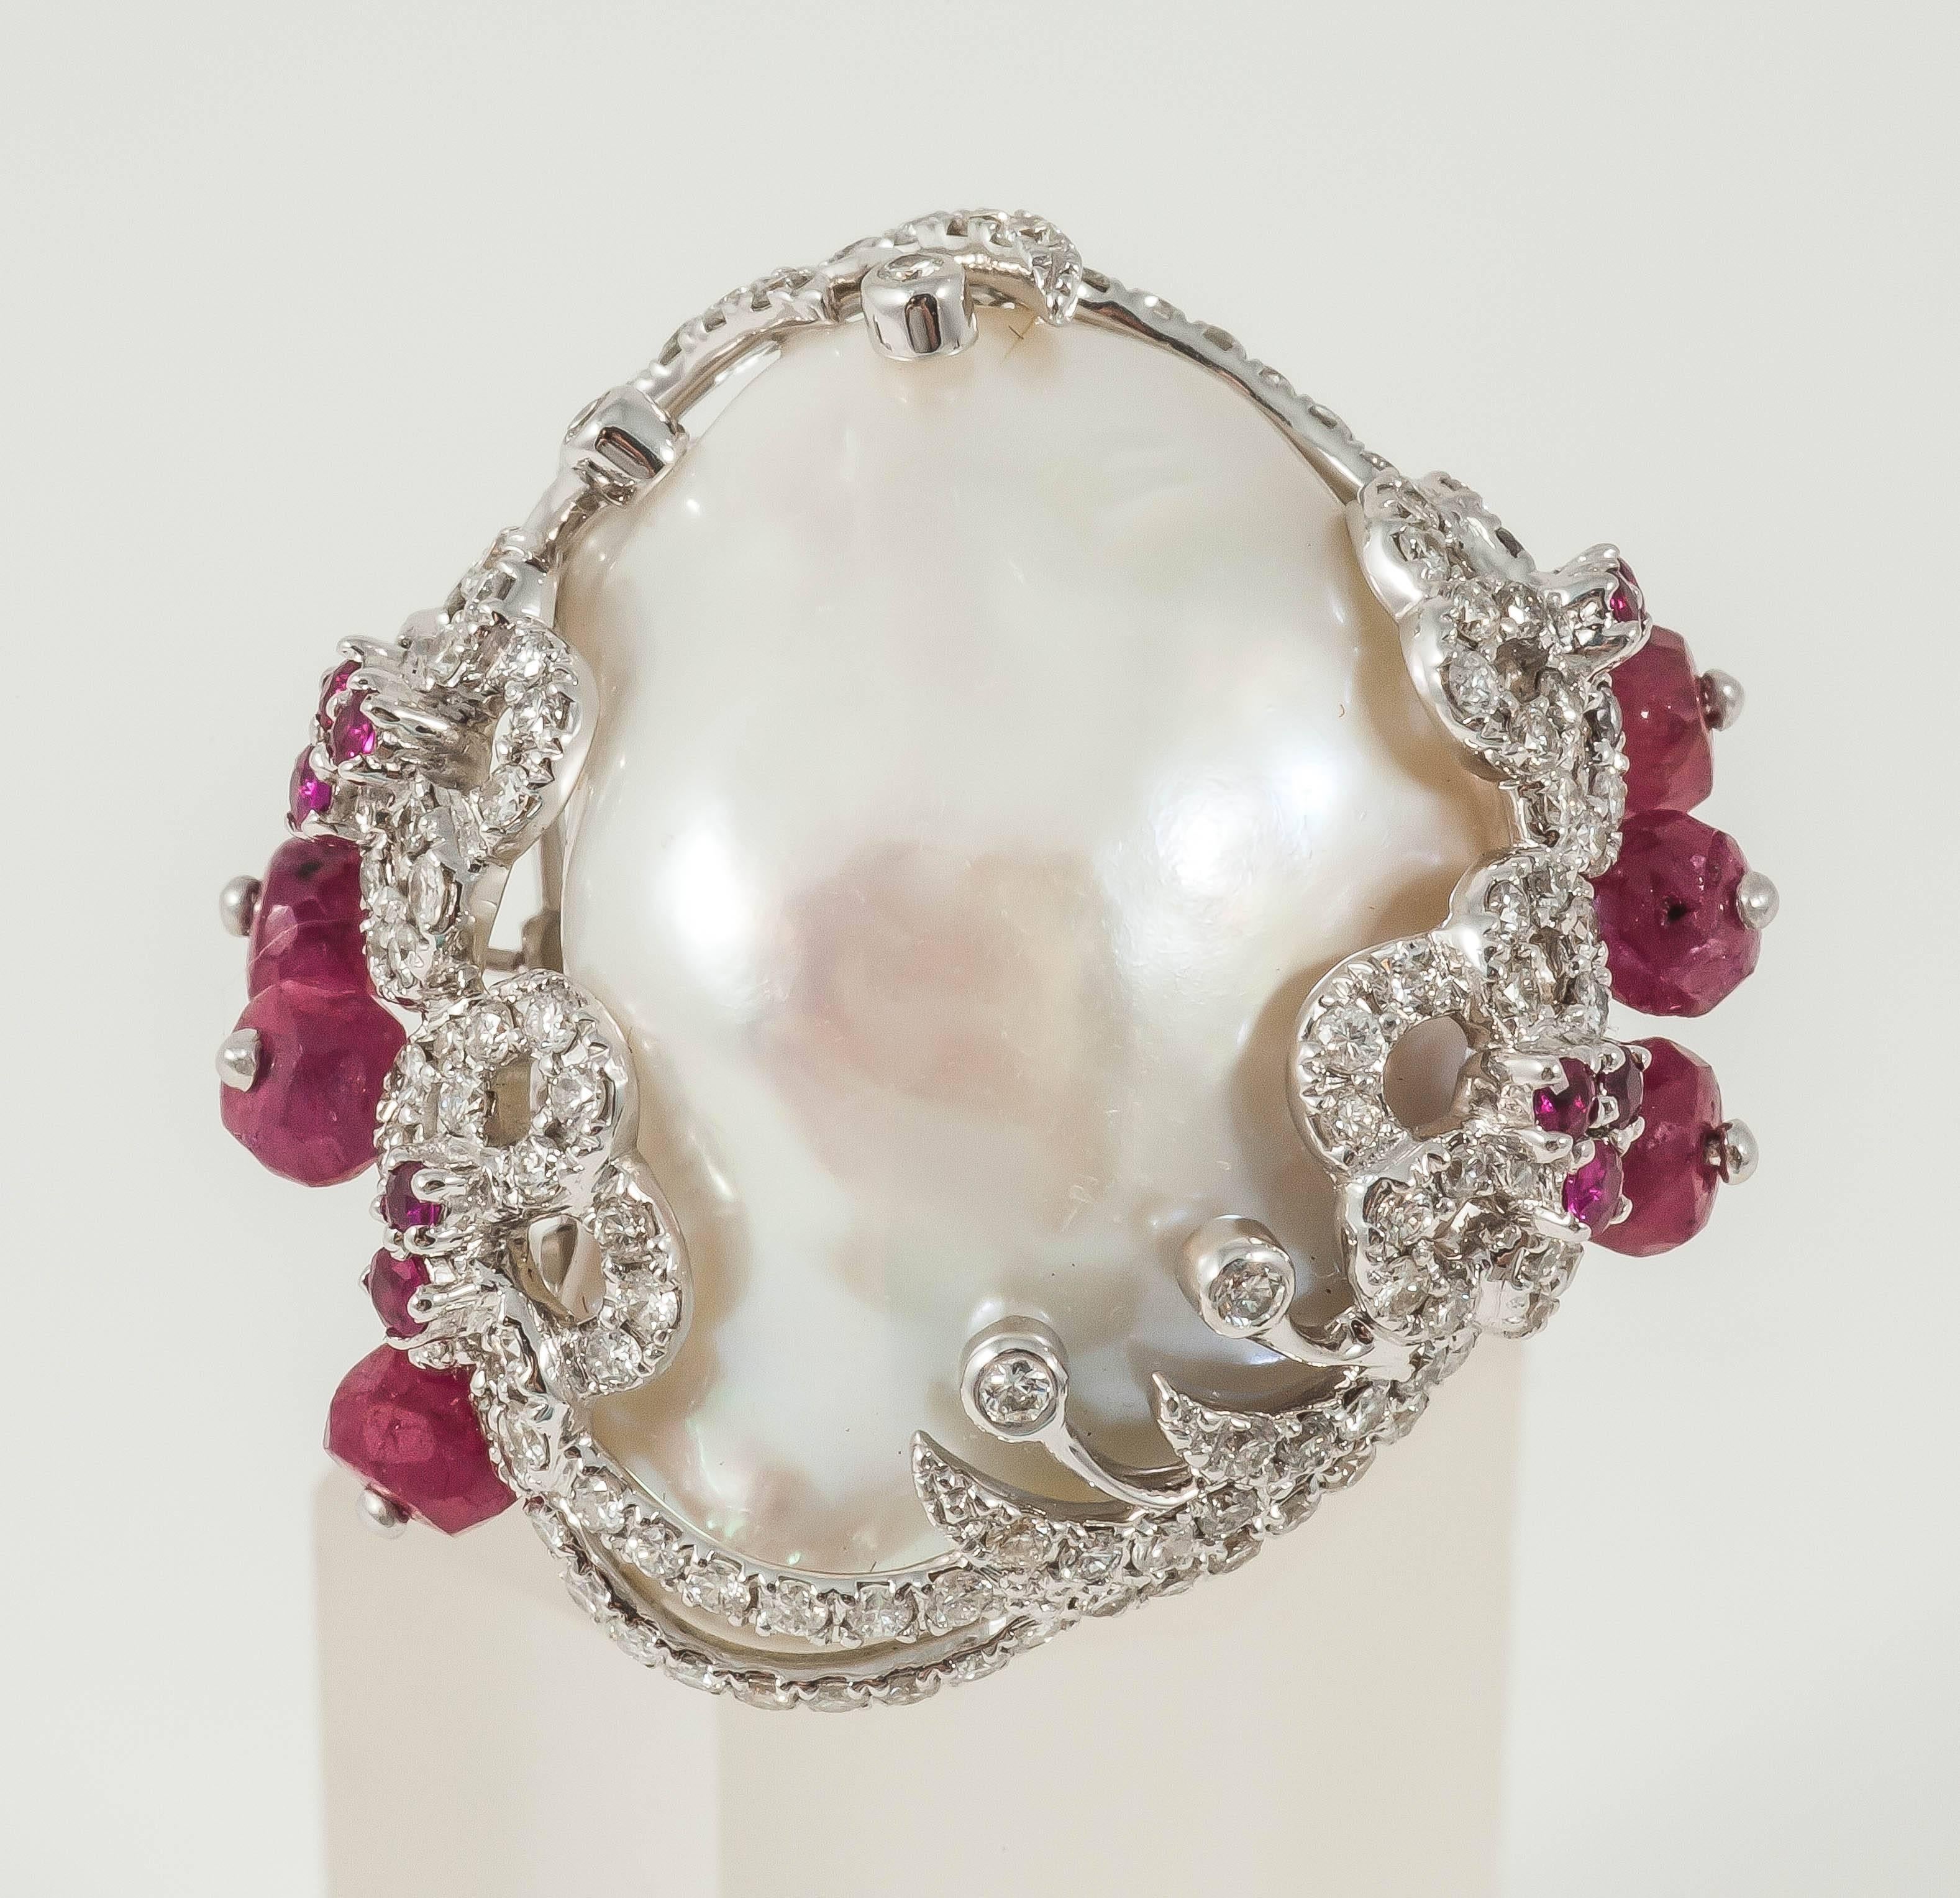 Baroque Pearl Ring encased in Diamond florals & Ruby beads

18K White Gold: 11.86gms
Diamond: 1.6cts
Ruby beads: 3.29cts
Baroque Pearl